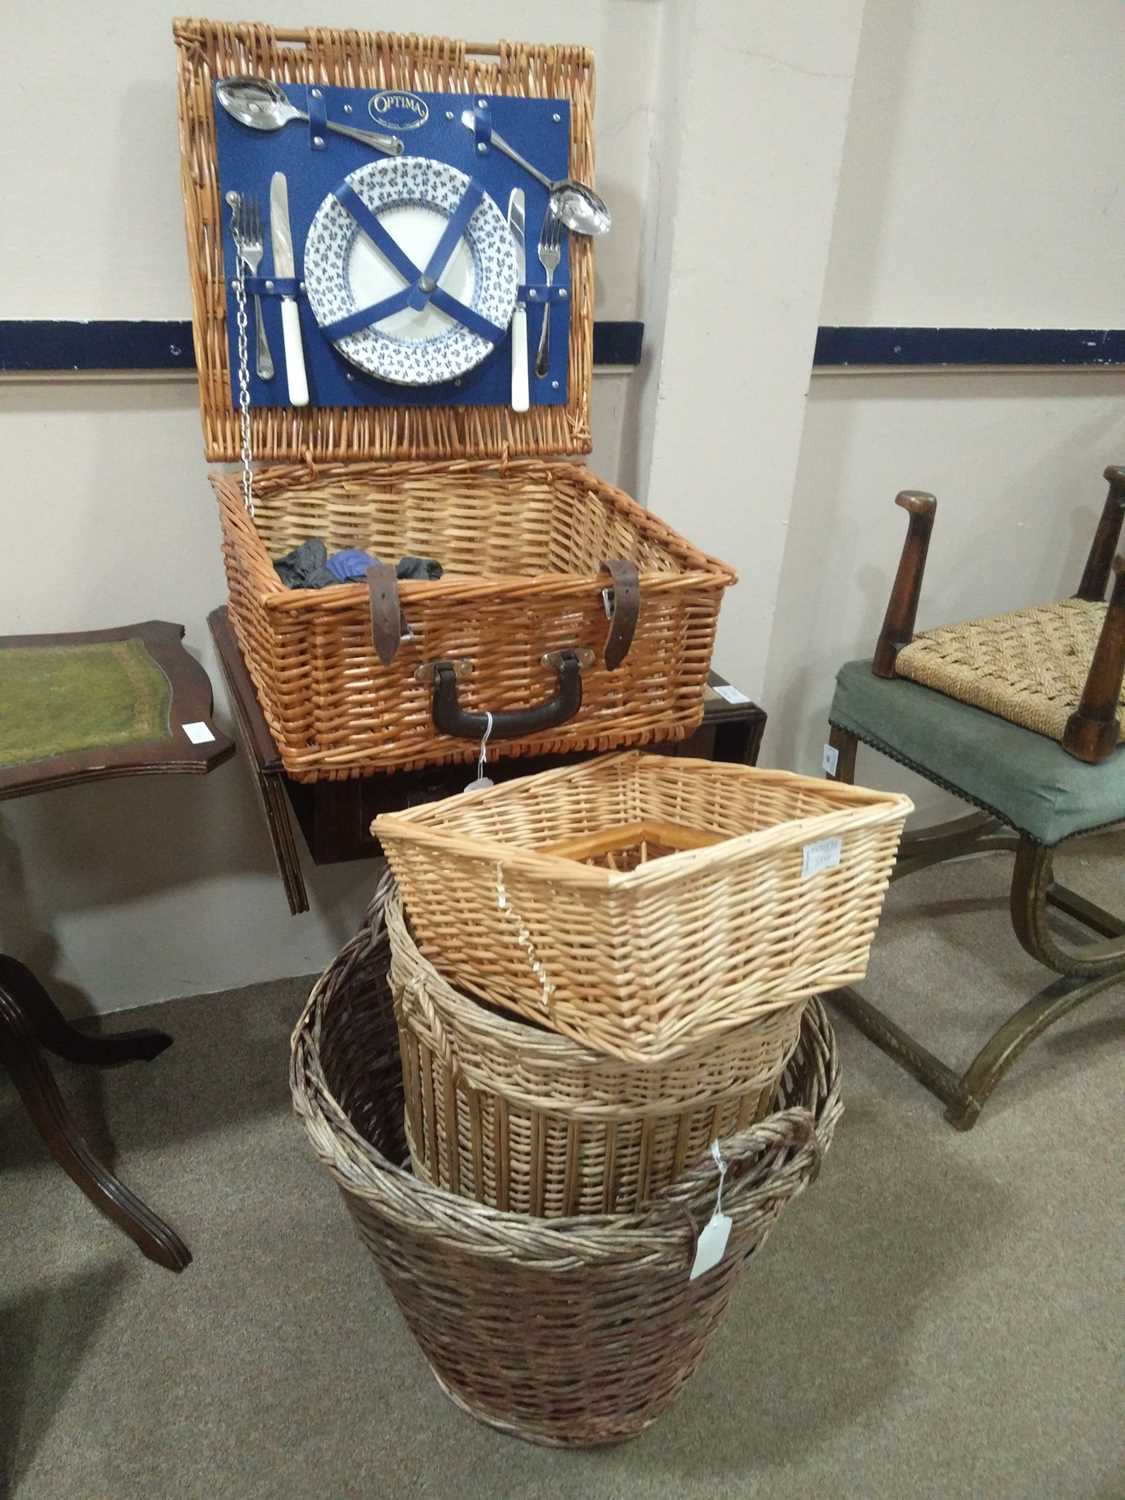 Lot 53 - A PICNIC SET CONTAINED IN A WICKER BASKET AND ANOTHER BASKET